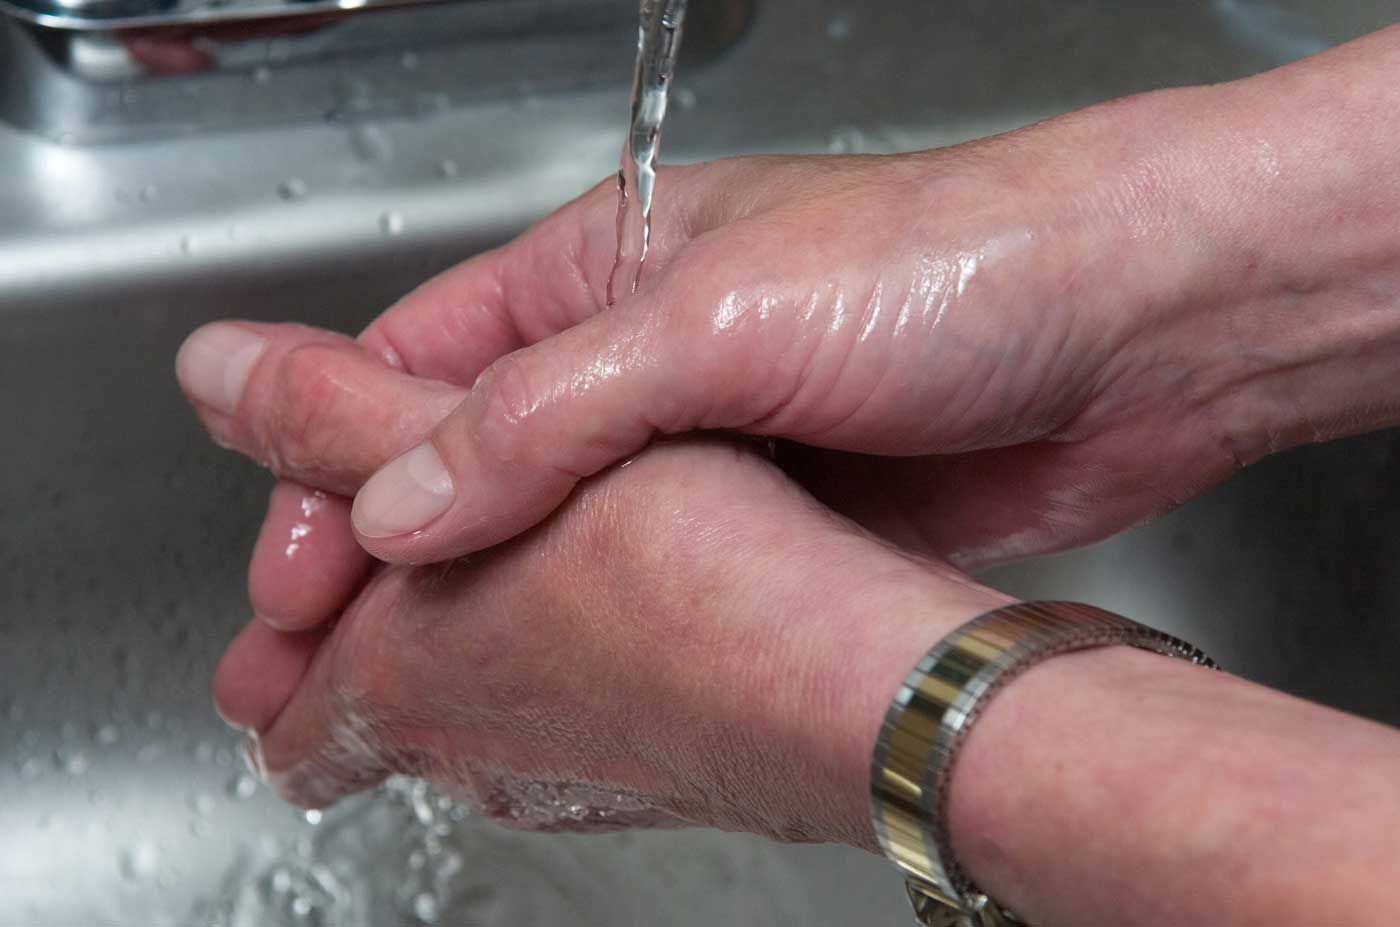 CDAD can be prevented by washing your hands with soap and warm water